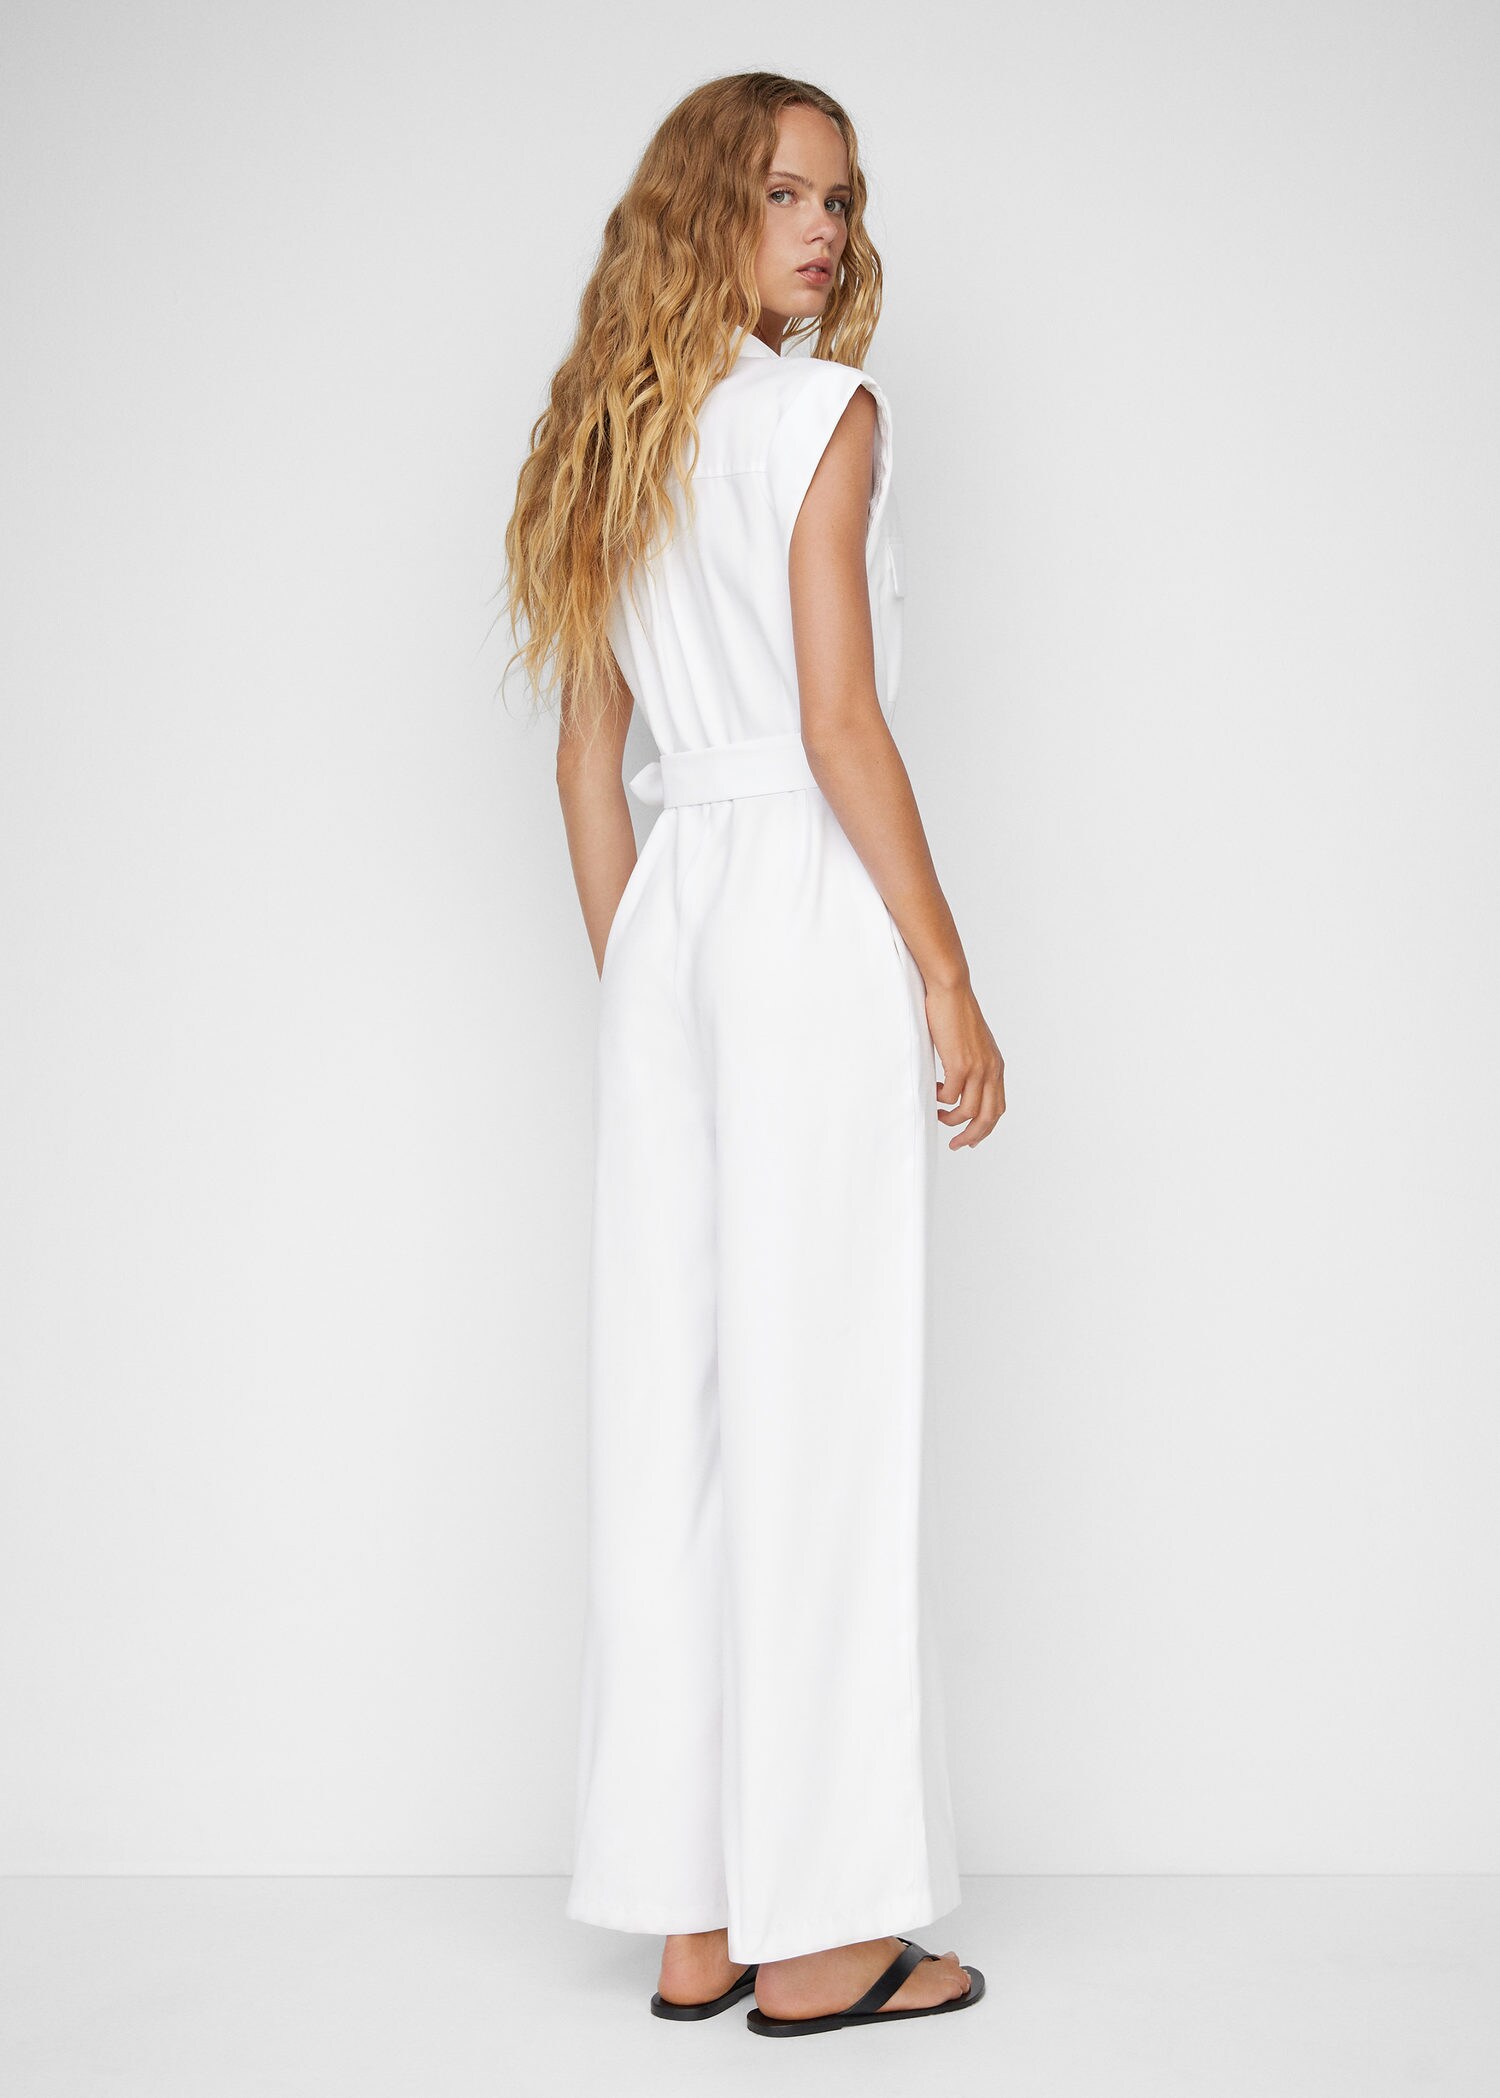 Aggregate more than 57 asos white jumpsuit latest